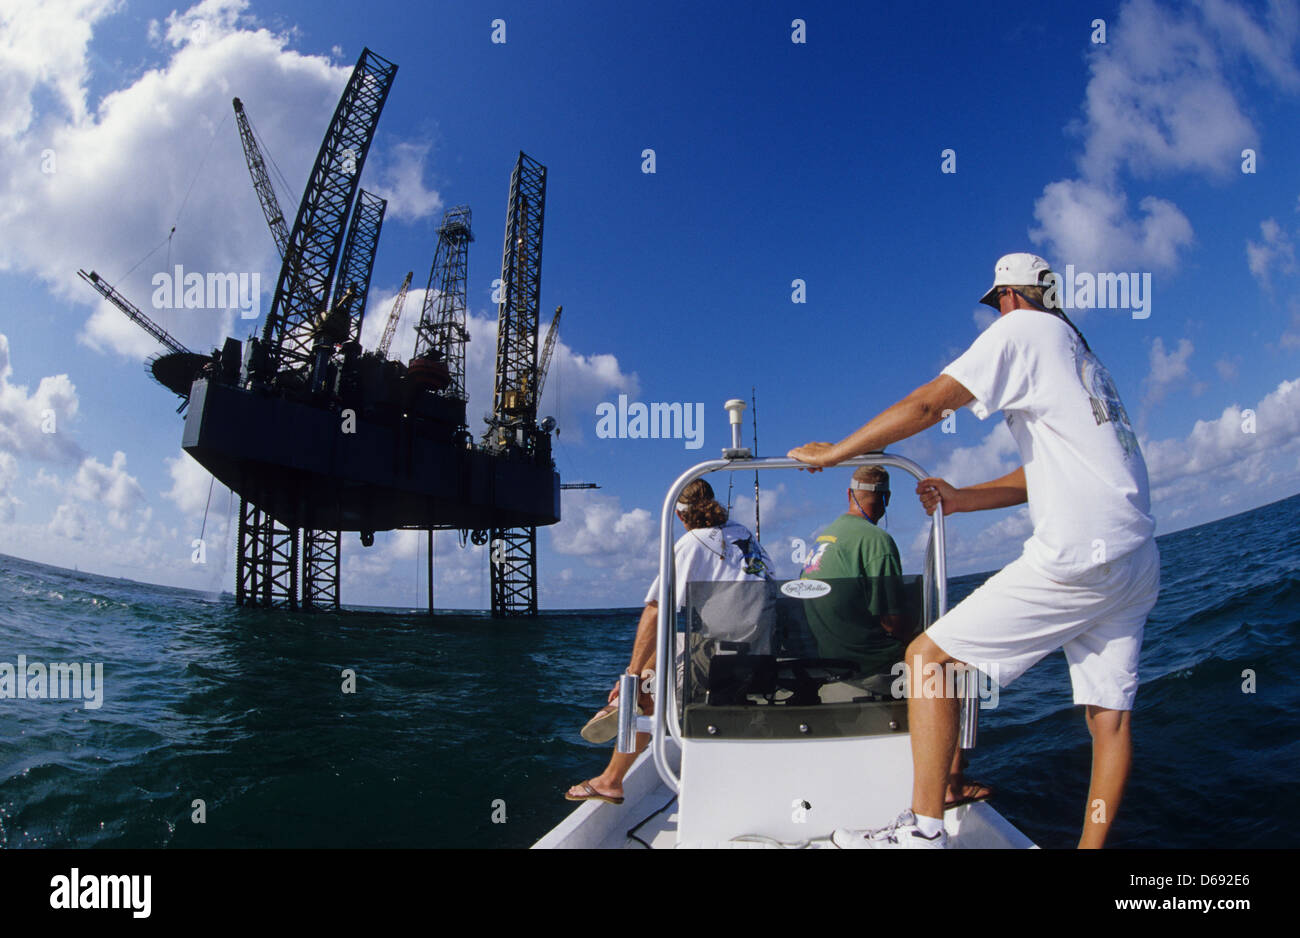 Men trolling and fishing near an oil rig drilling platform in the